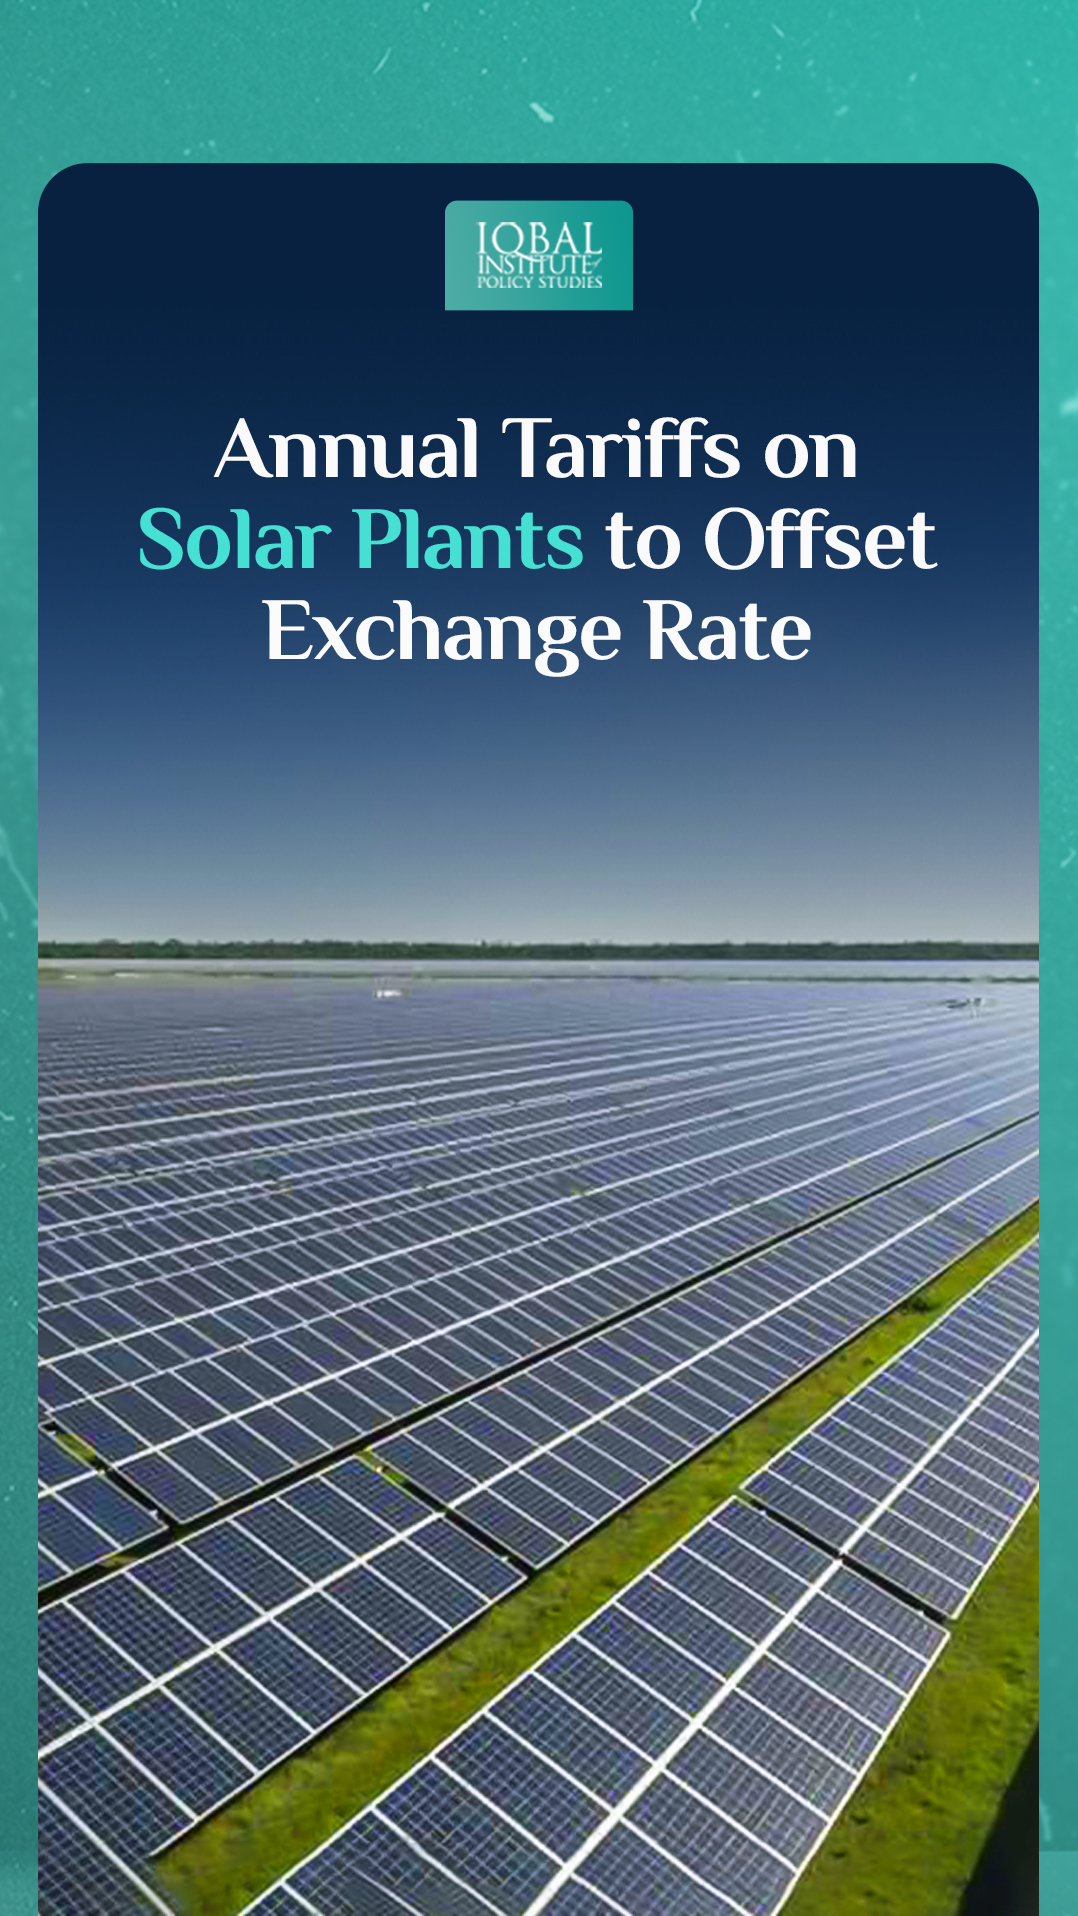 Annual Tariffs on Solar Plants to Offset Exchange Rate